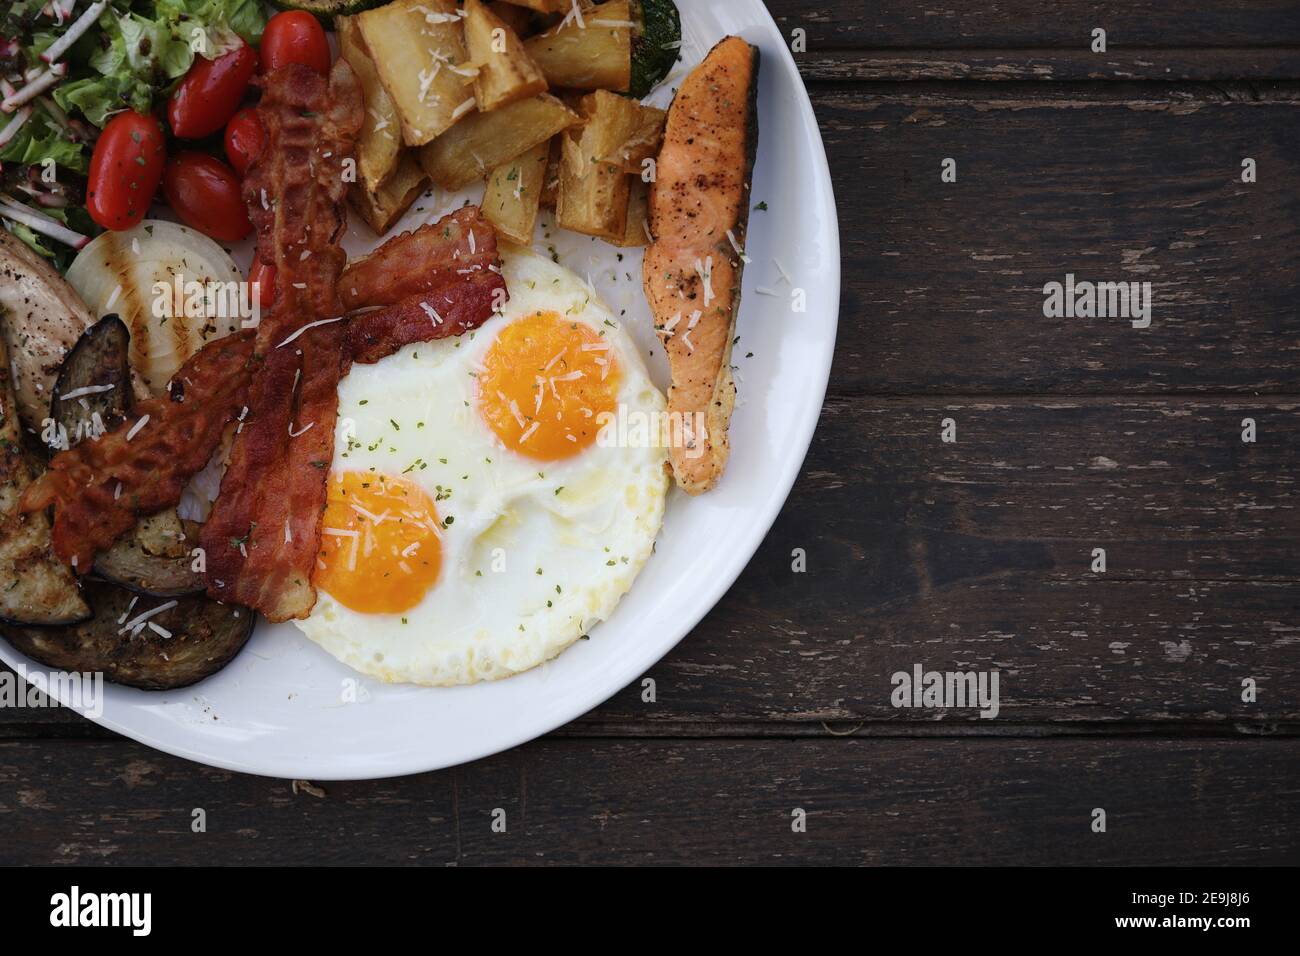 American breakfast with egg bacon sausage and salad Stock Photo